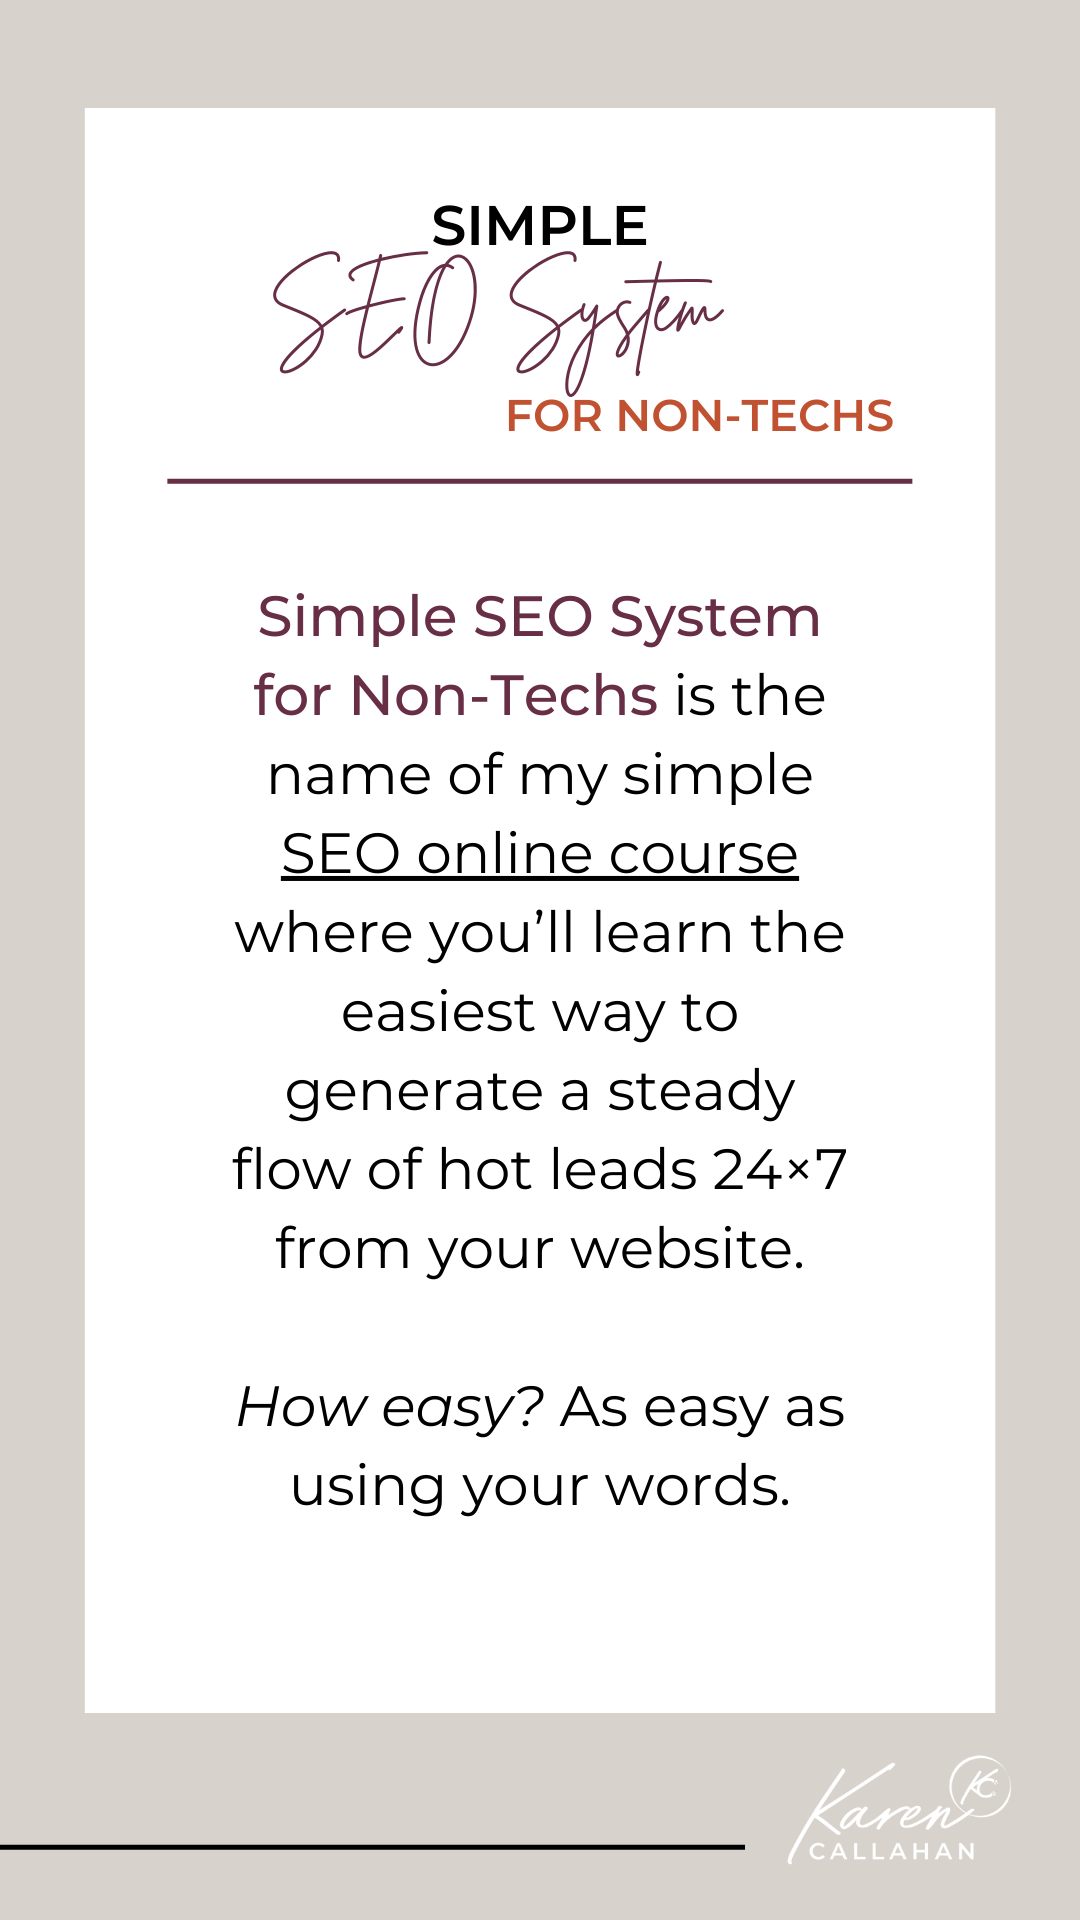 Simple SEO System for Non-Techs intro slide